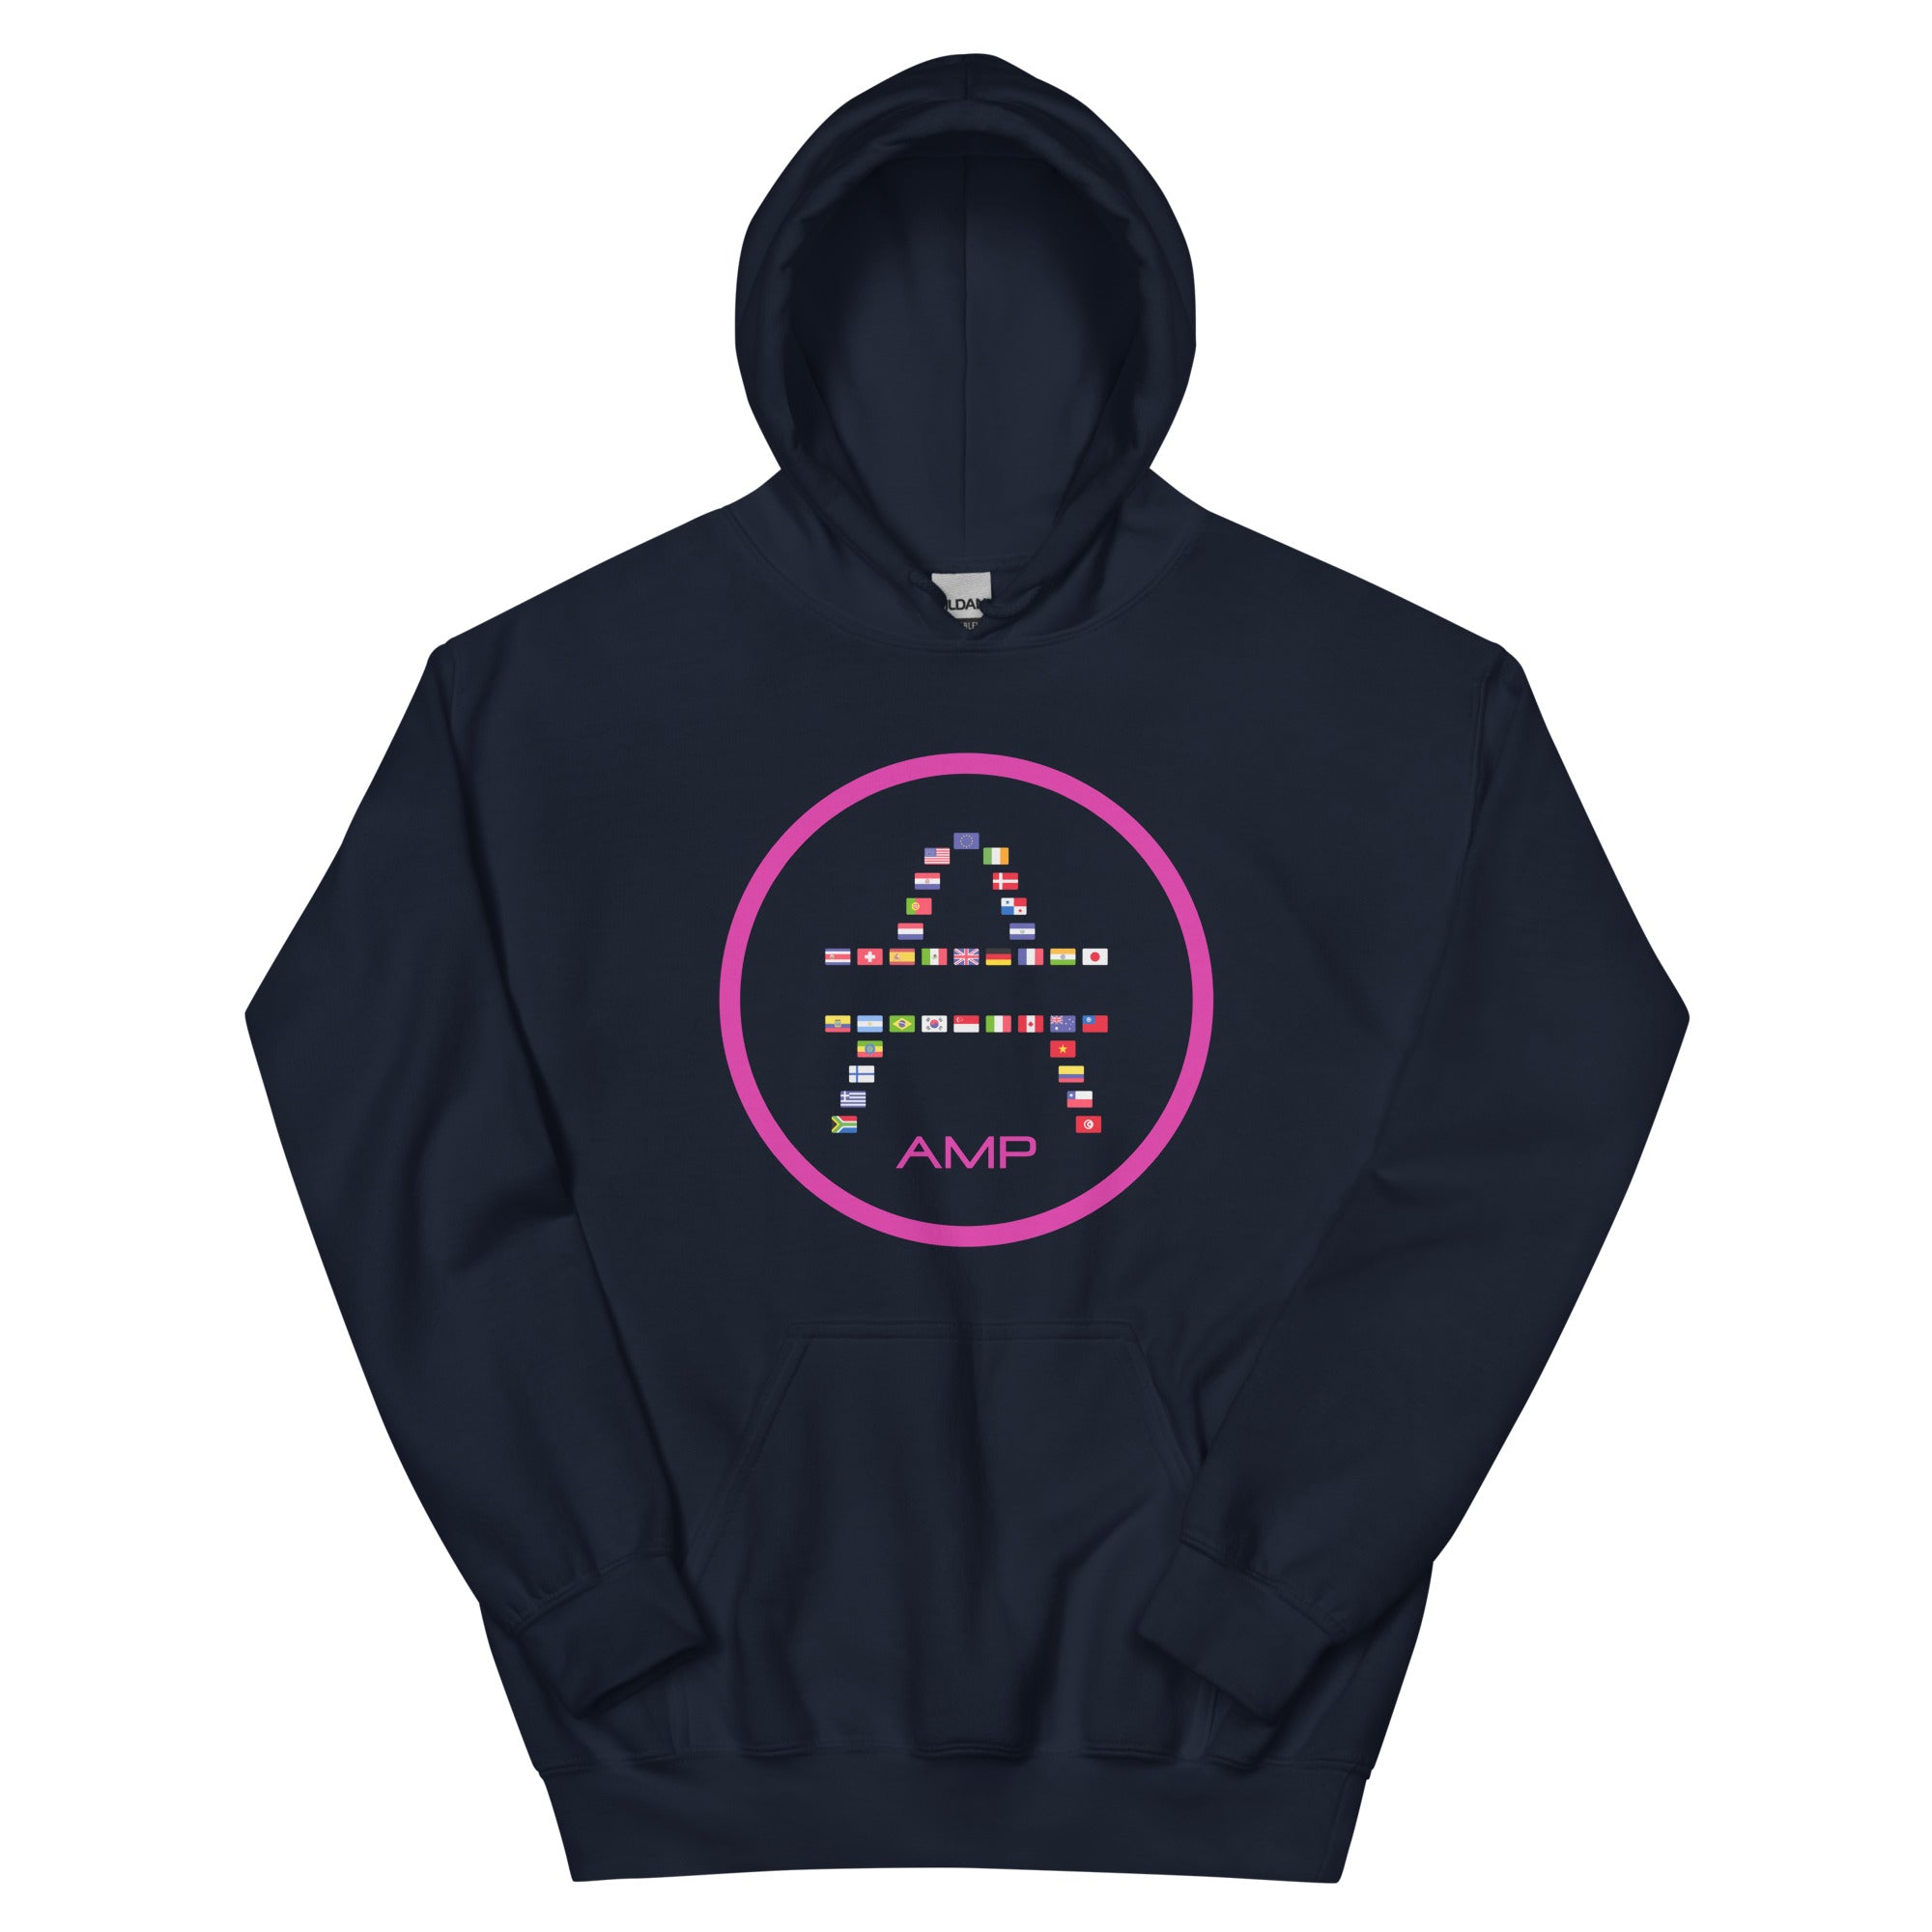 a AMP Swagg Global hoodie in navy